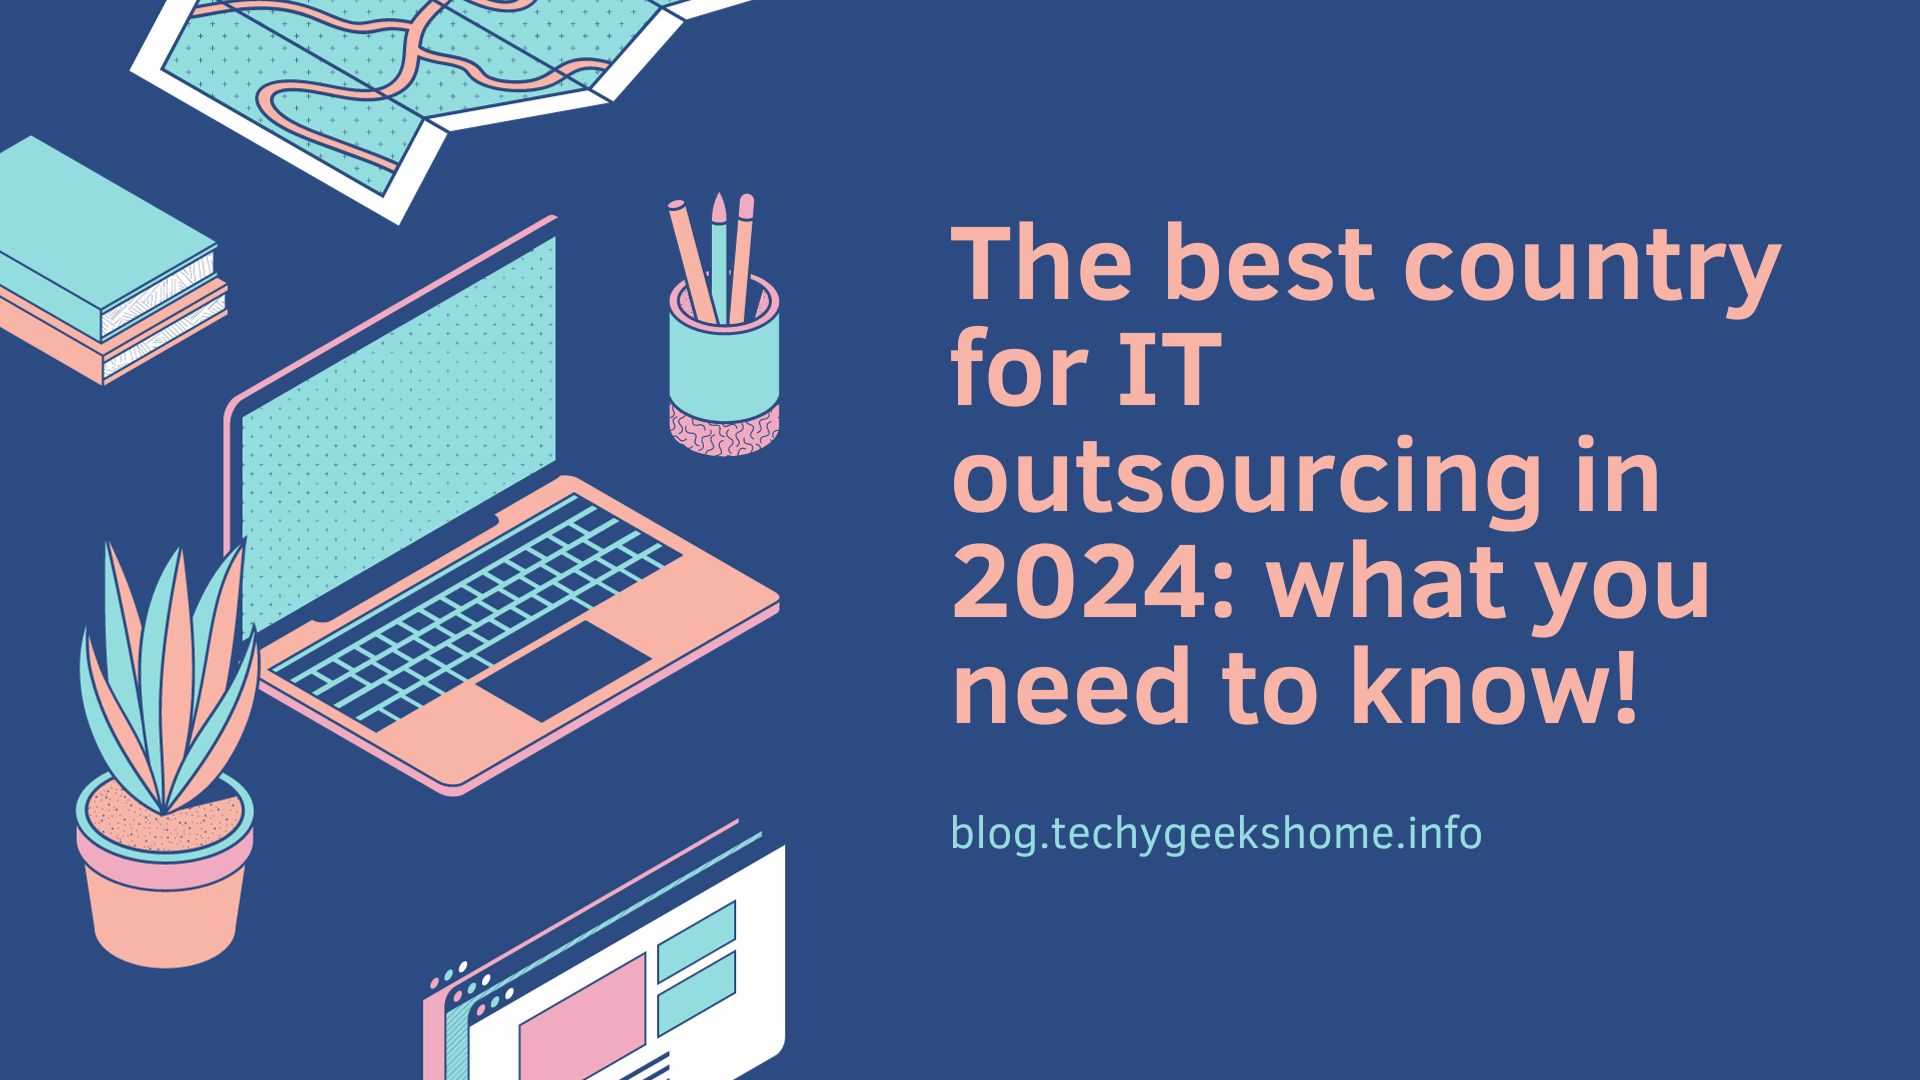 The best country for IT outsourcing in 2024: what you need to know!